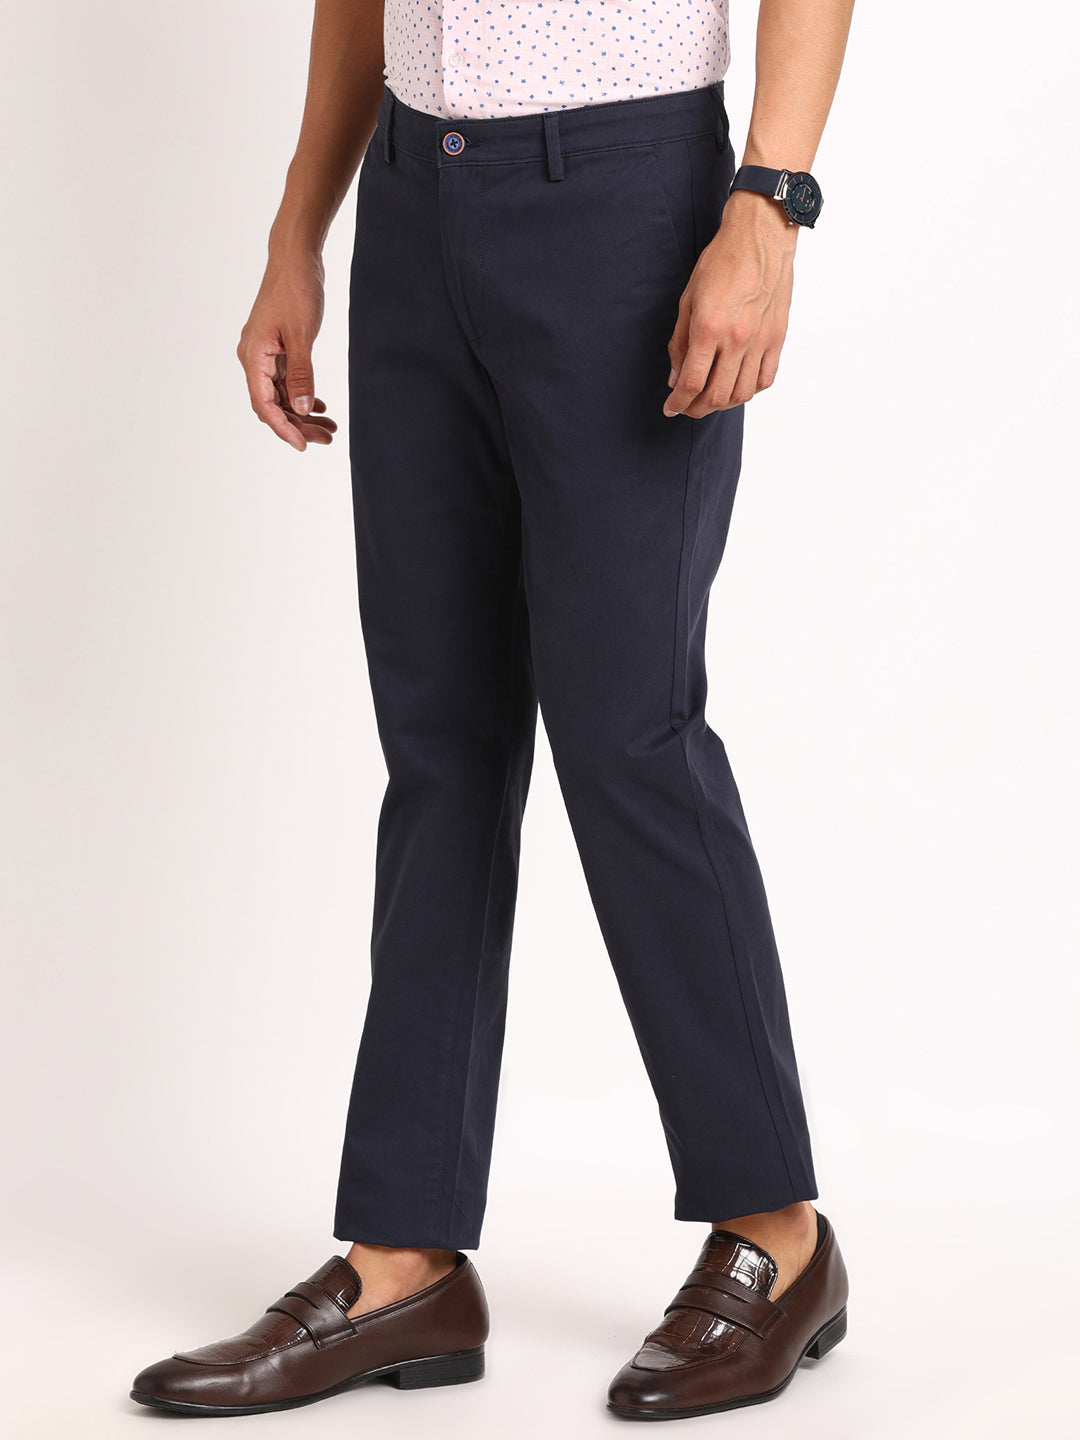 Cotton Stretch Navy Plain Ultra Slim Fit Flat Front Casual Trouser